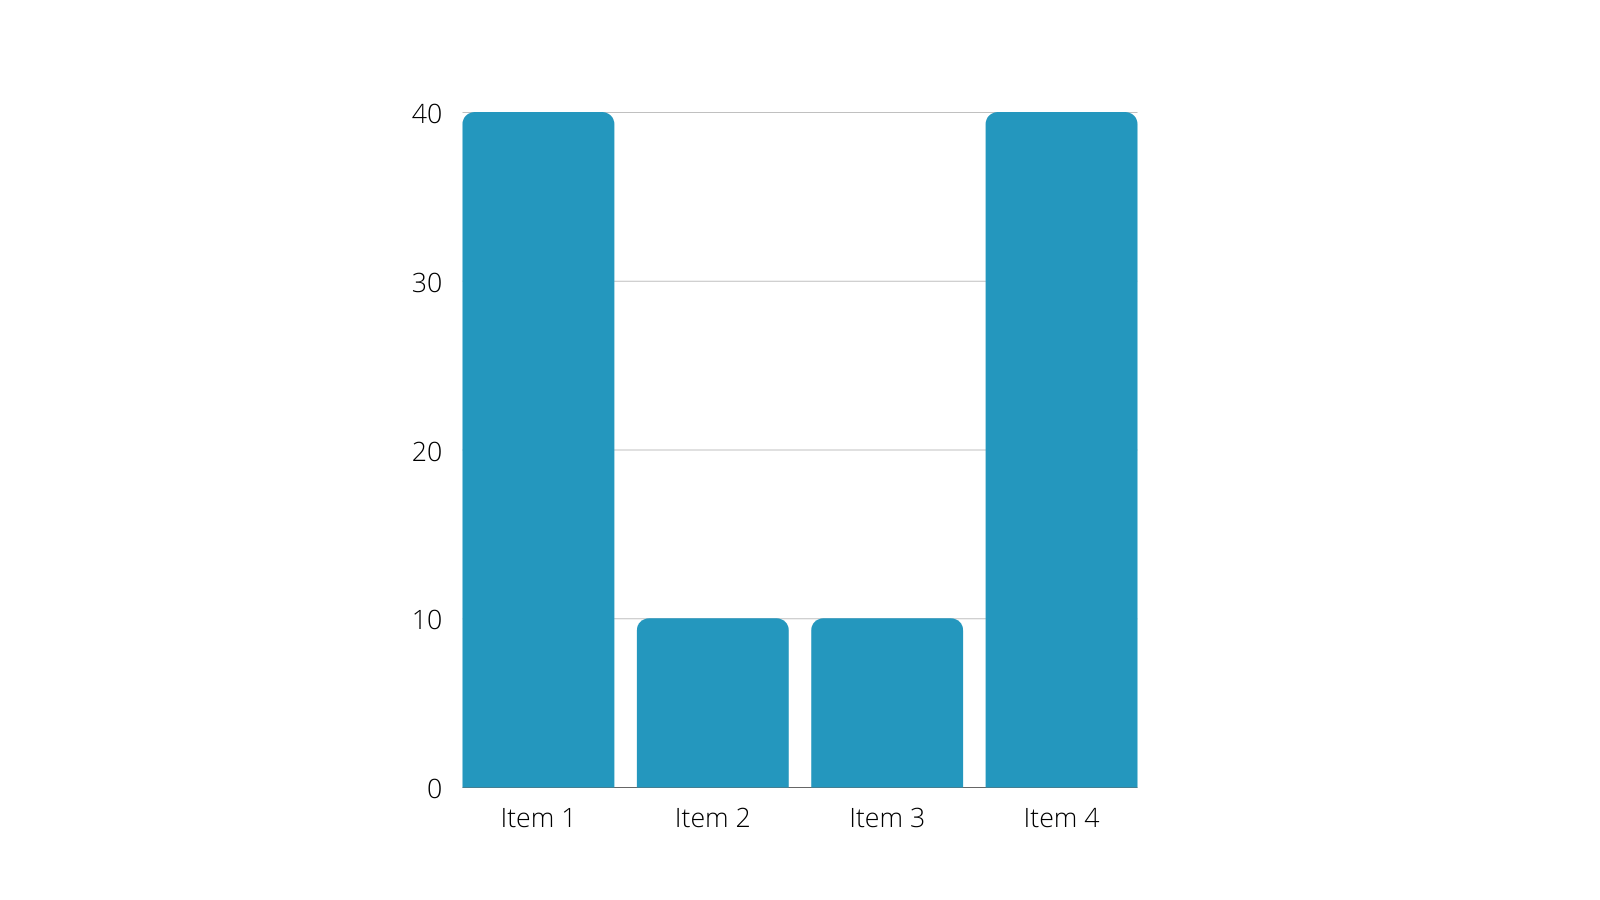 A bar graph with touchpoints 1 and 4 at 40 and touchpoints 2 and 3 at 10